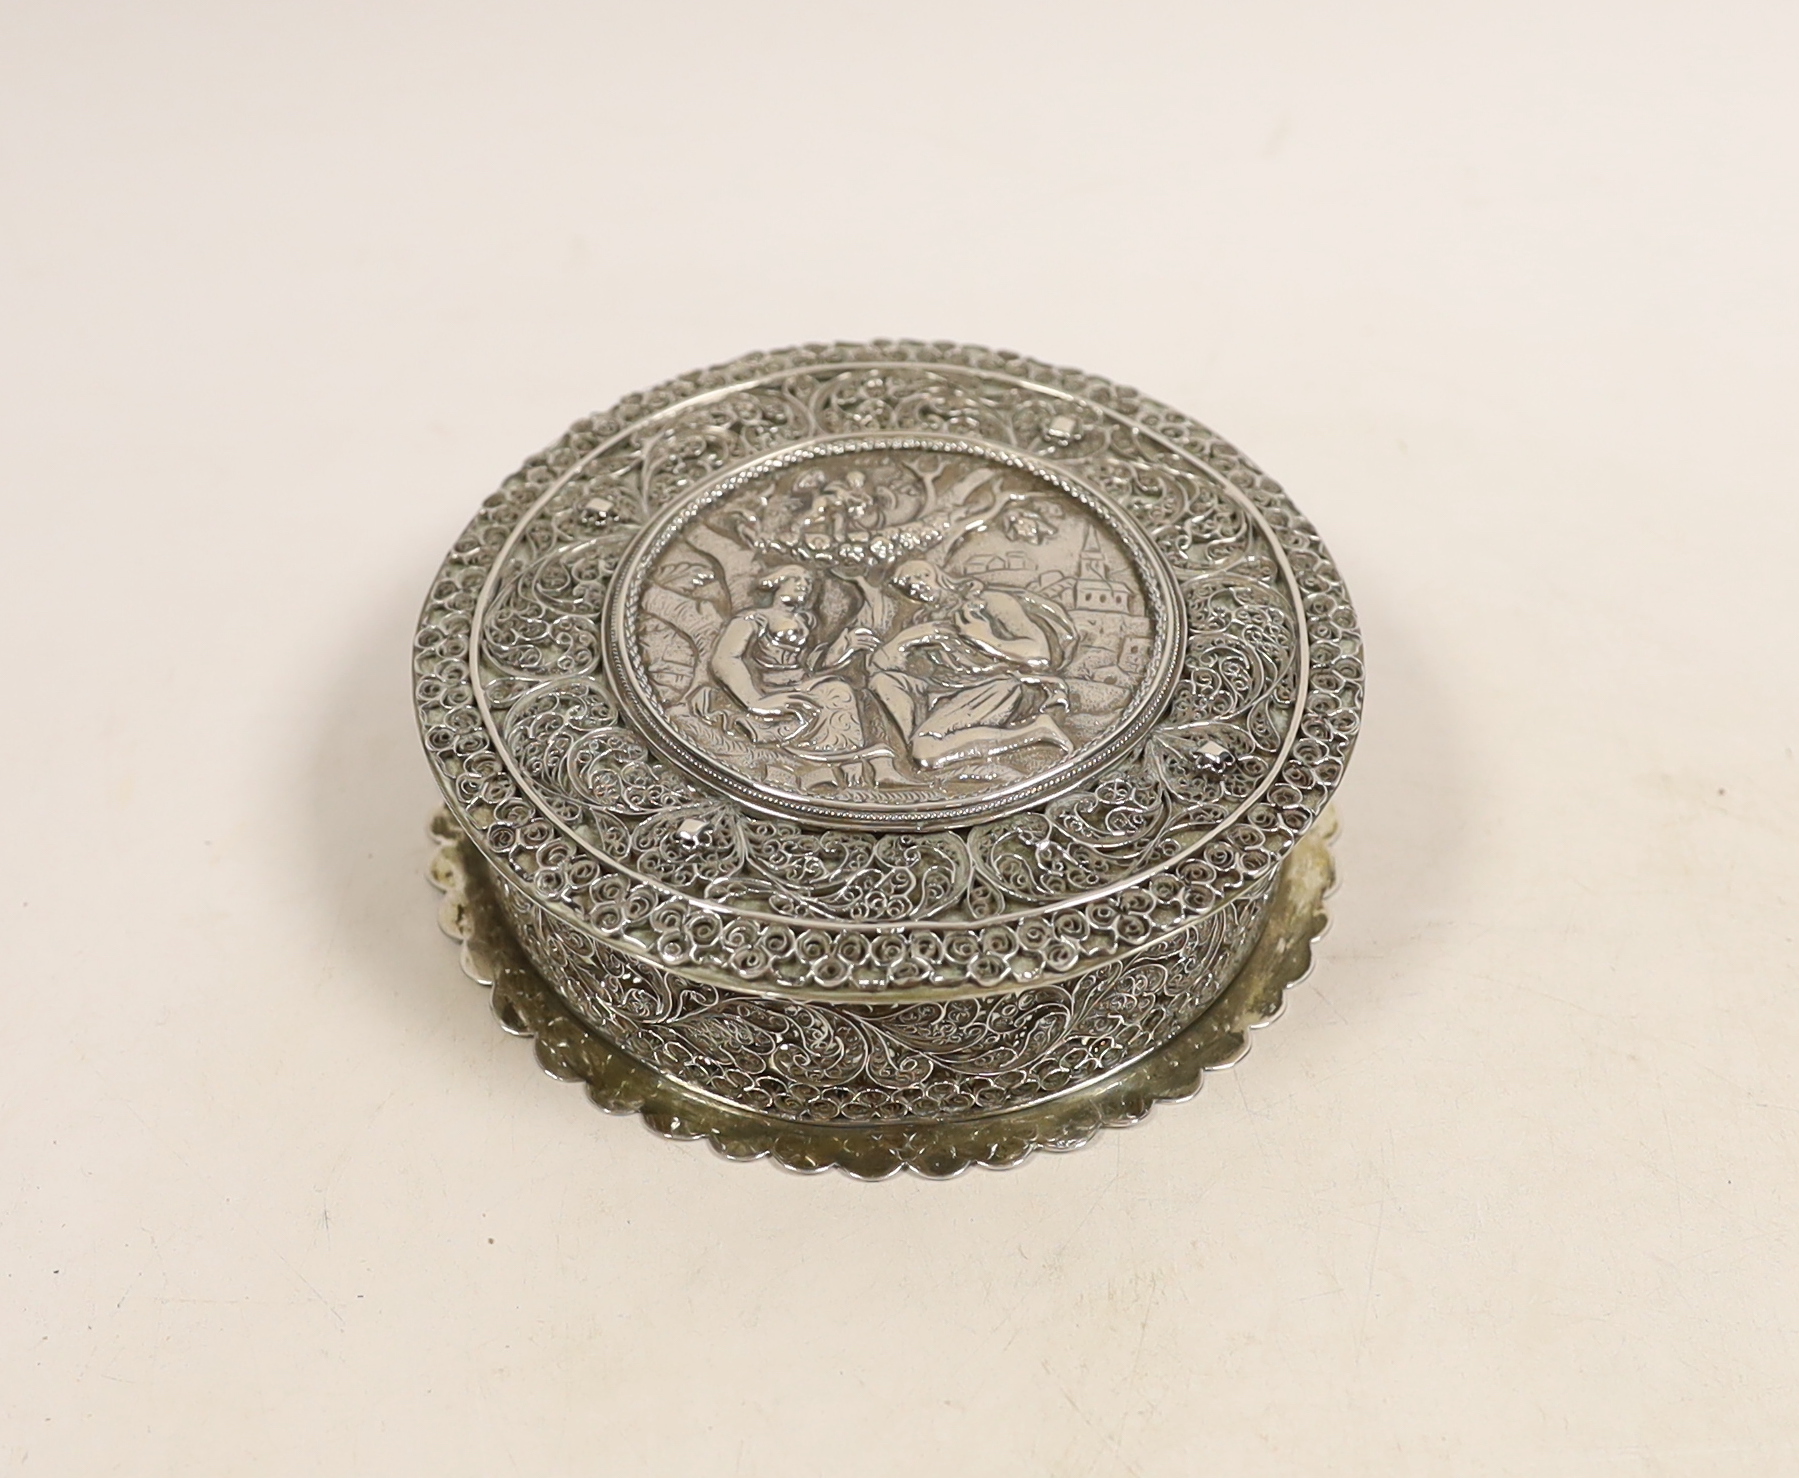 A continental white metal circular box and cover, with applied filigree decoration, diameter 11.2cm, 8.5oz.